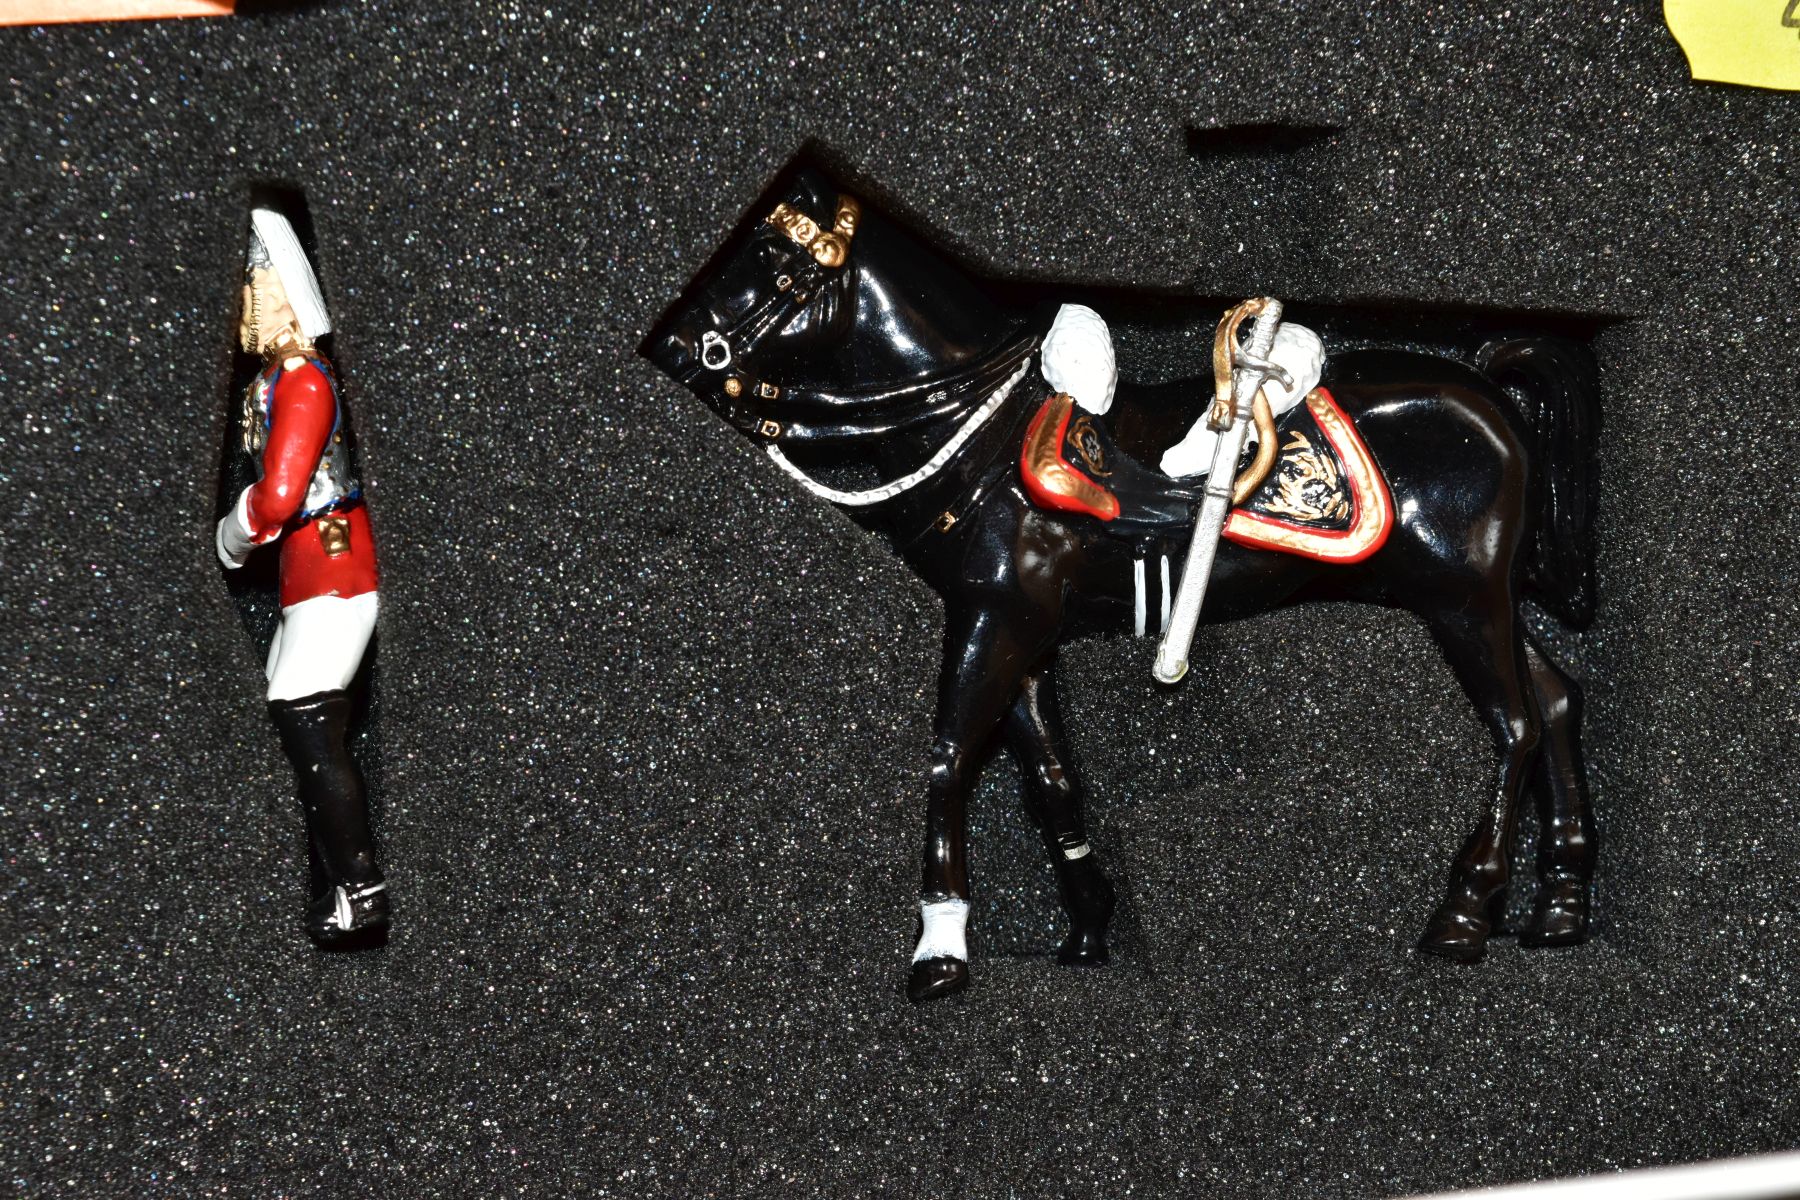 SIX BOXED BRITAINS TROOPING THE COLOUR SETS, Regimental Sergeant Major - Grenadier Guards No - Image 10 of 10